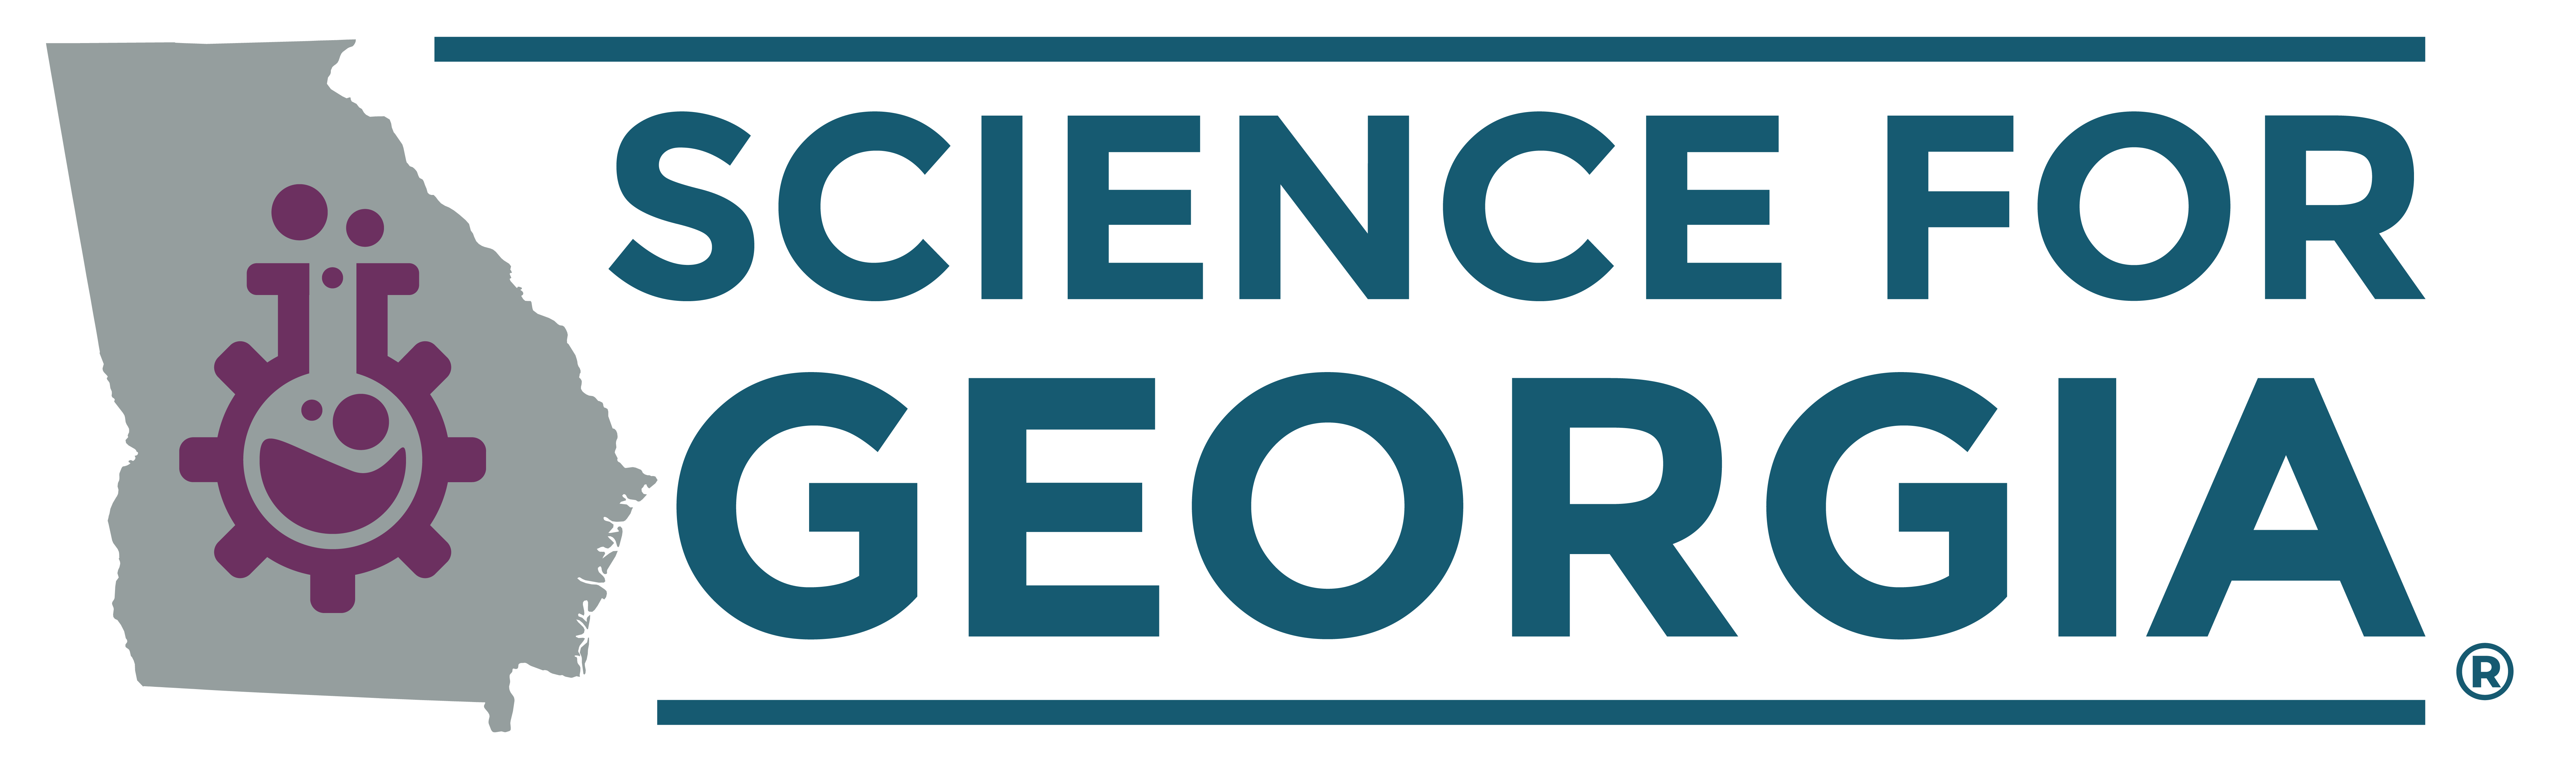 Science for Georgia works to build a bridge between scientists and the public to advocate for the responsible use of science in public policy. We are a 501(c)(3).